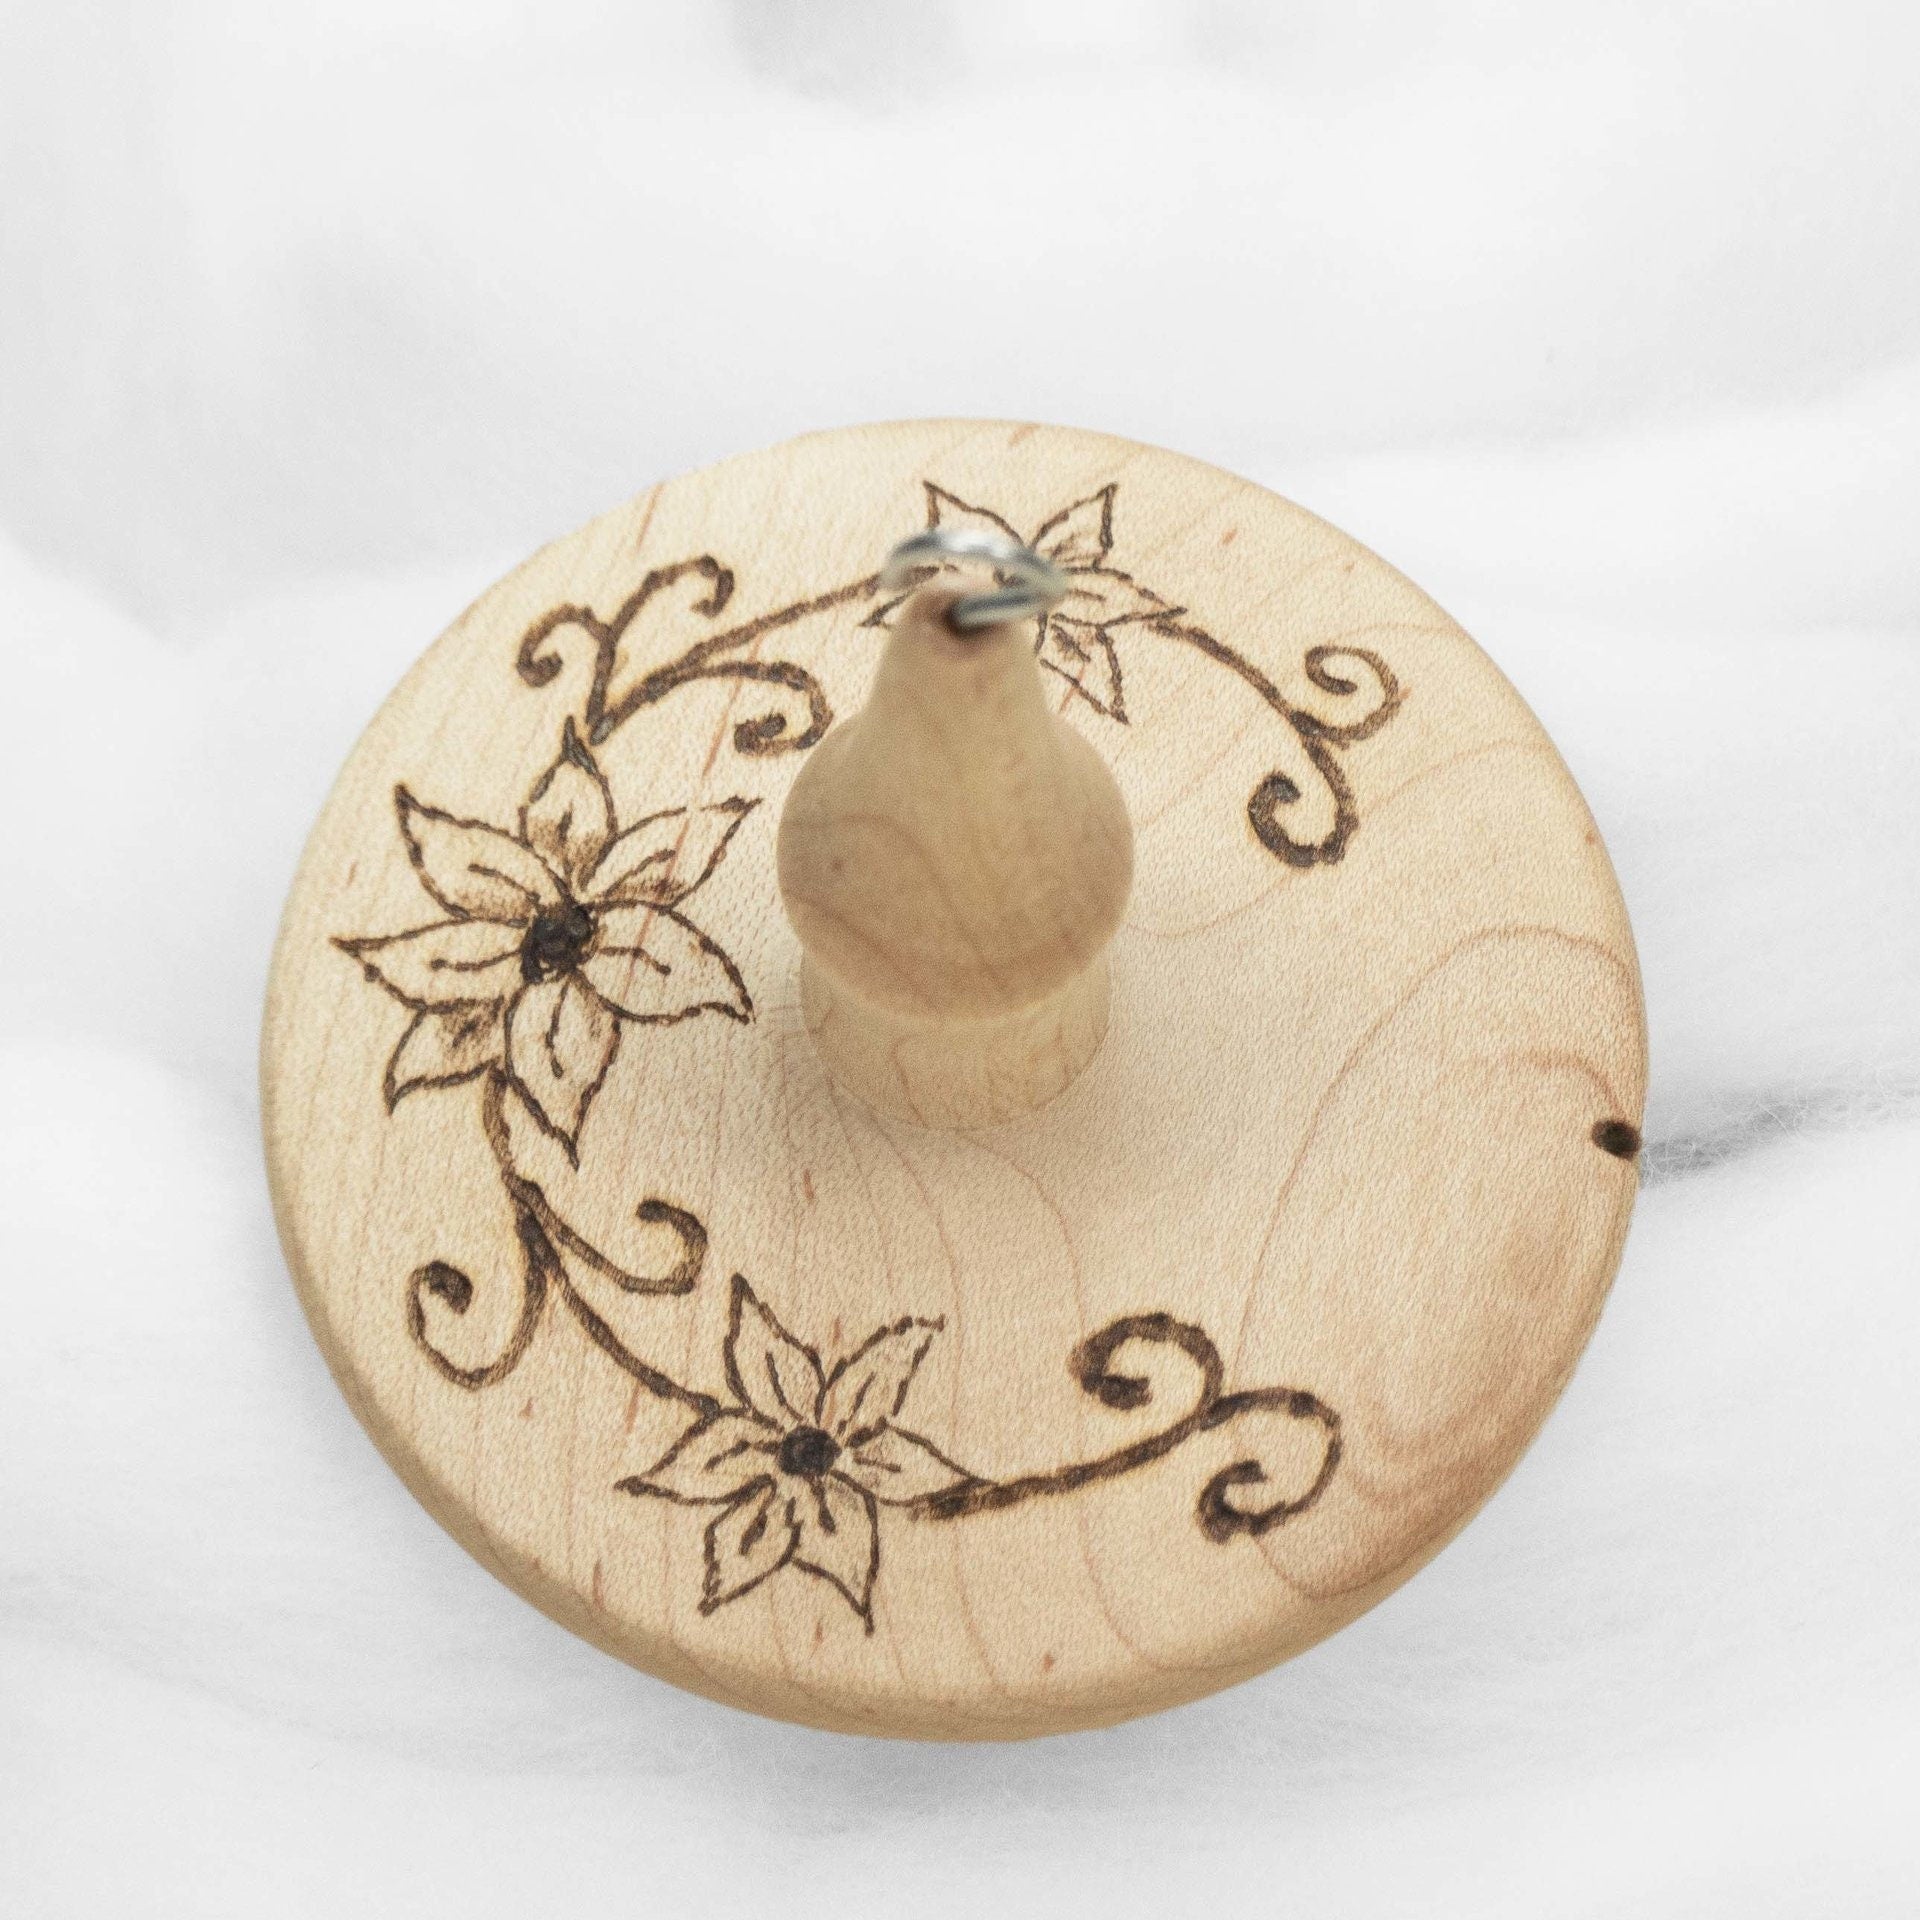 Clematis Vine - Llampetia Hand-Turned Maple Wood Drop Spindle Heavyweight - Top Whorl 43 Grams